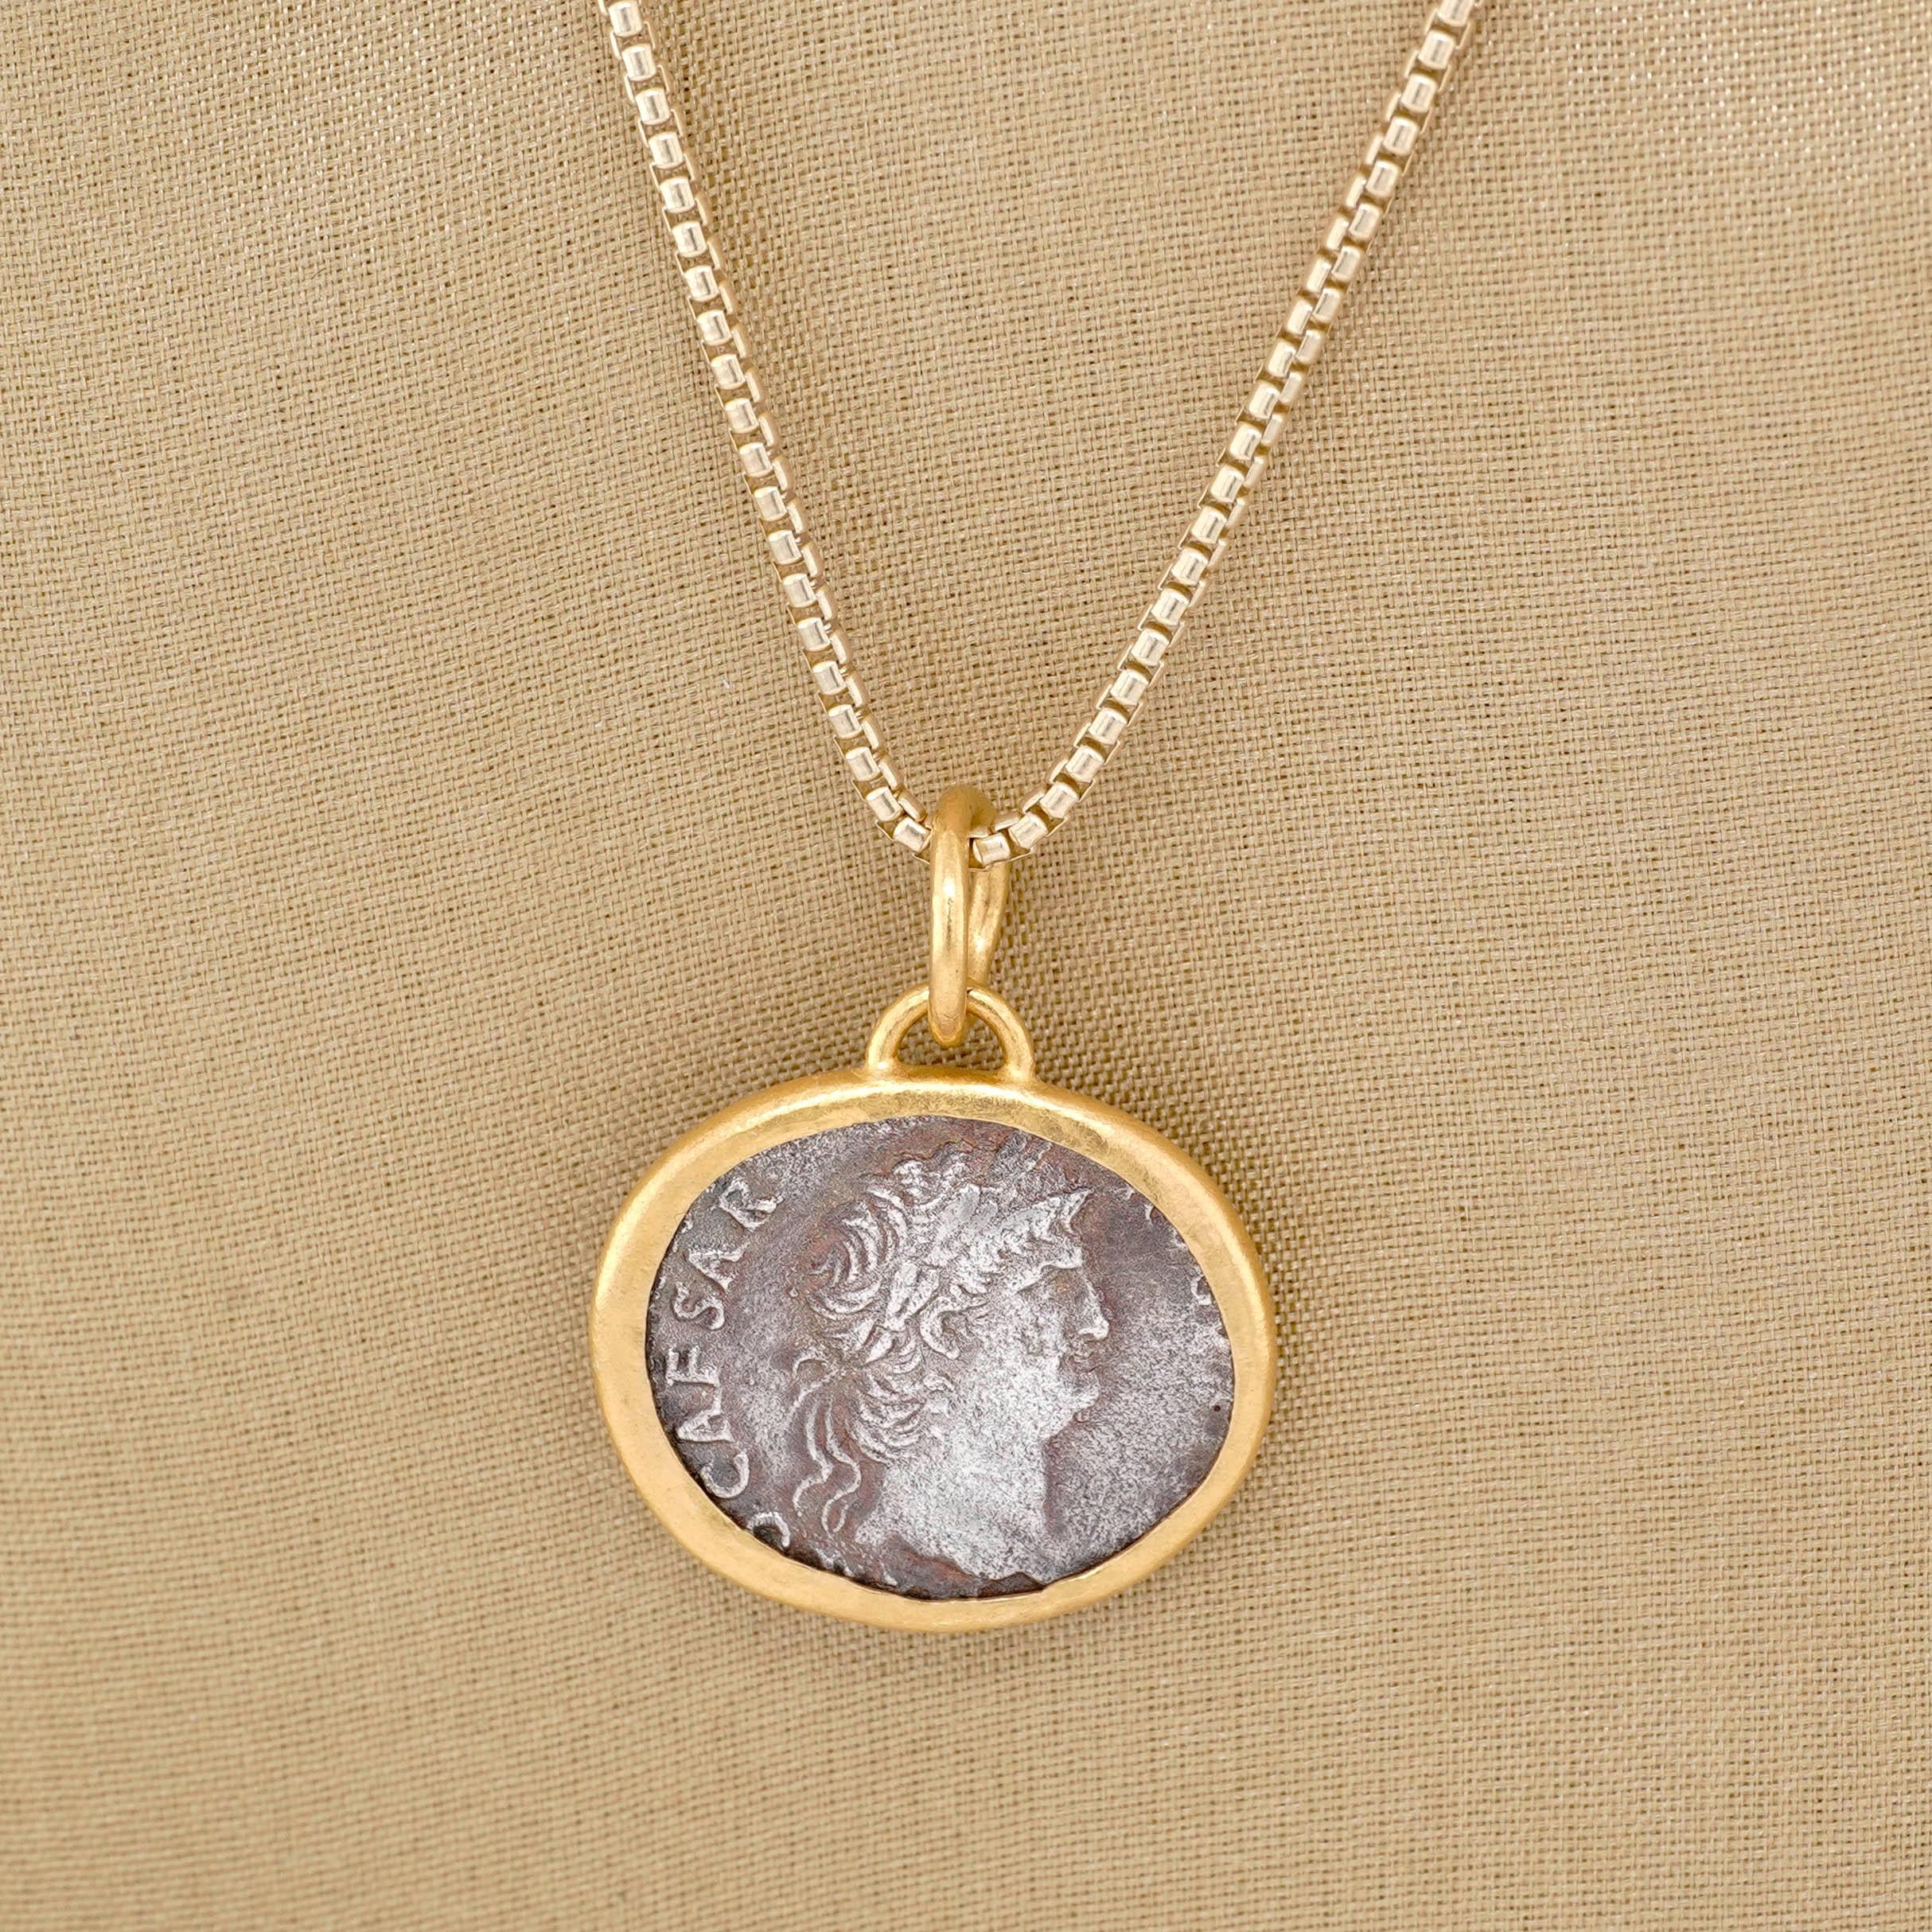 Round Cut Julius Caesar Coin Replica Amulet Pendant Necklace with 24kt Gold and Silver